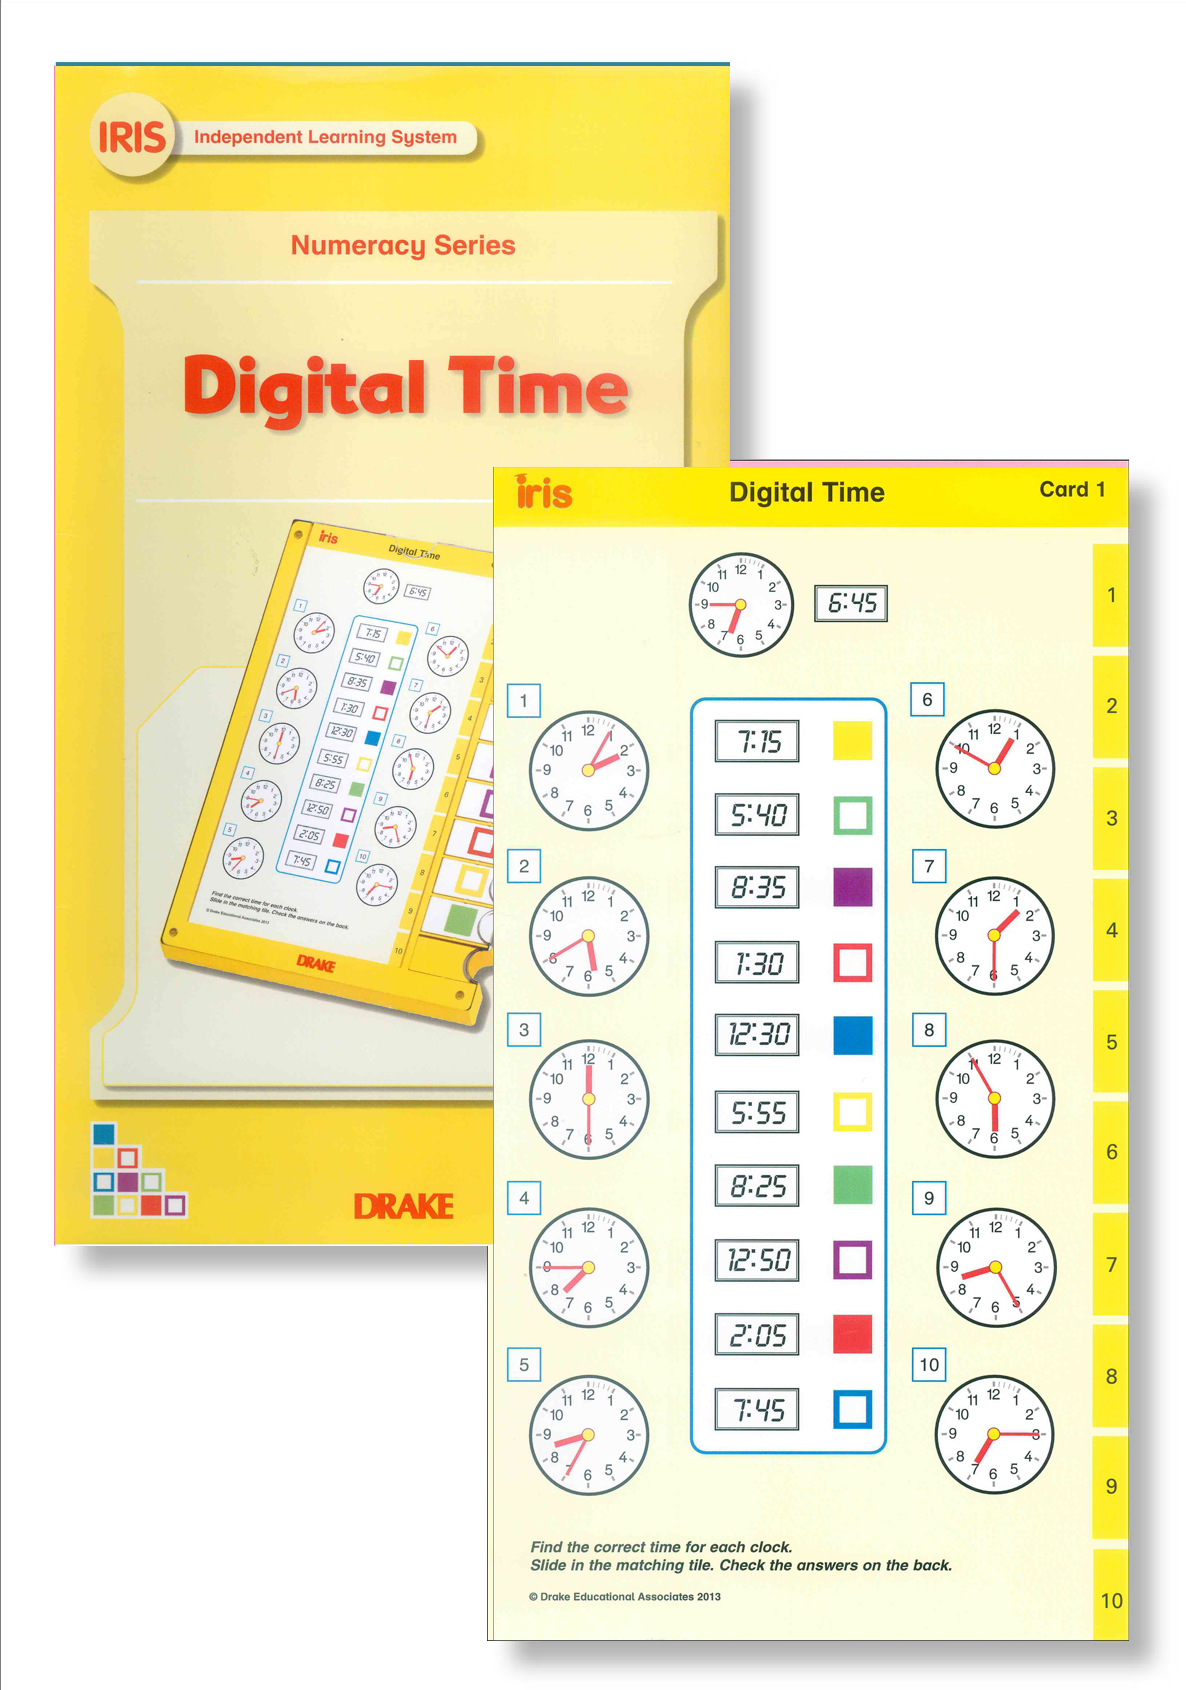 Iris Study Cards: Early Numeracy Year 3 - Digital Time